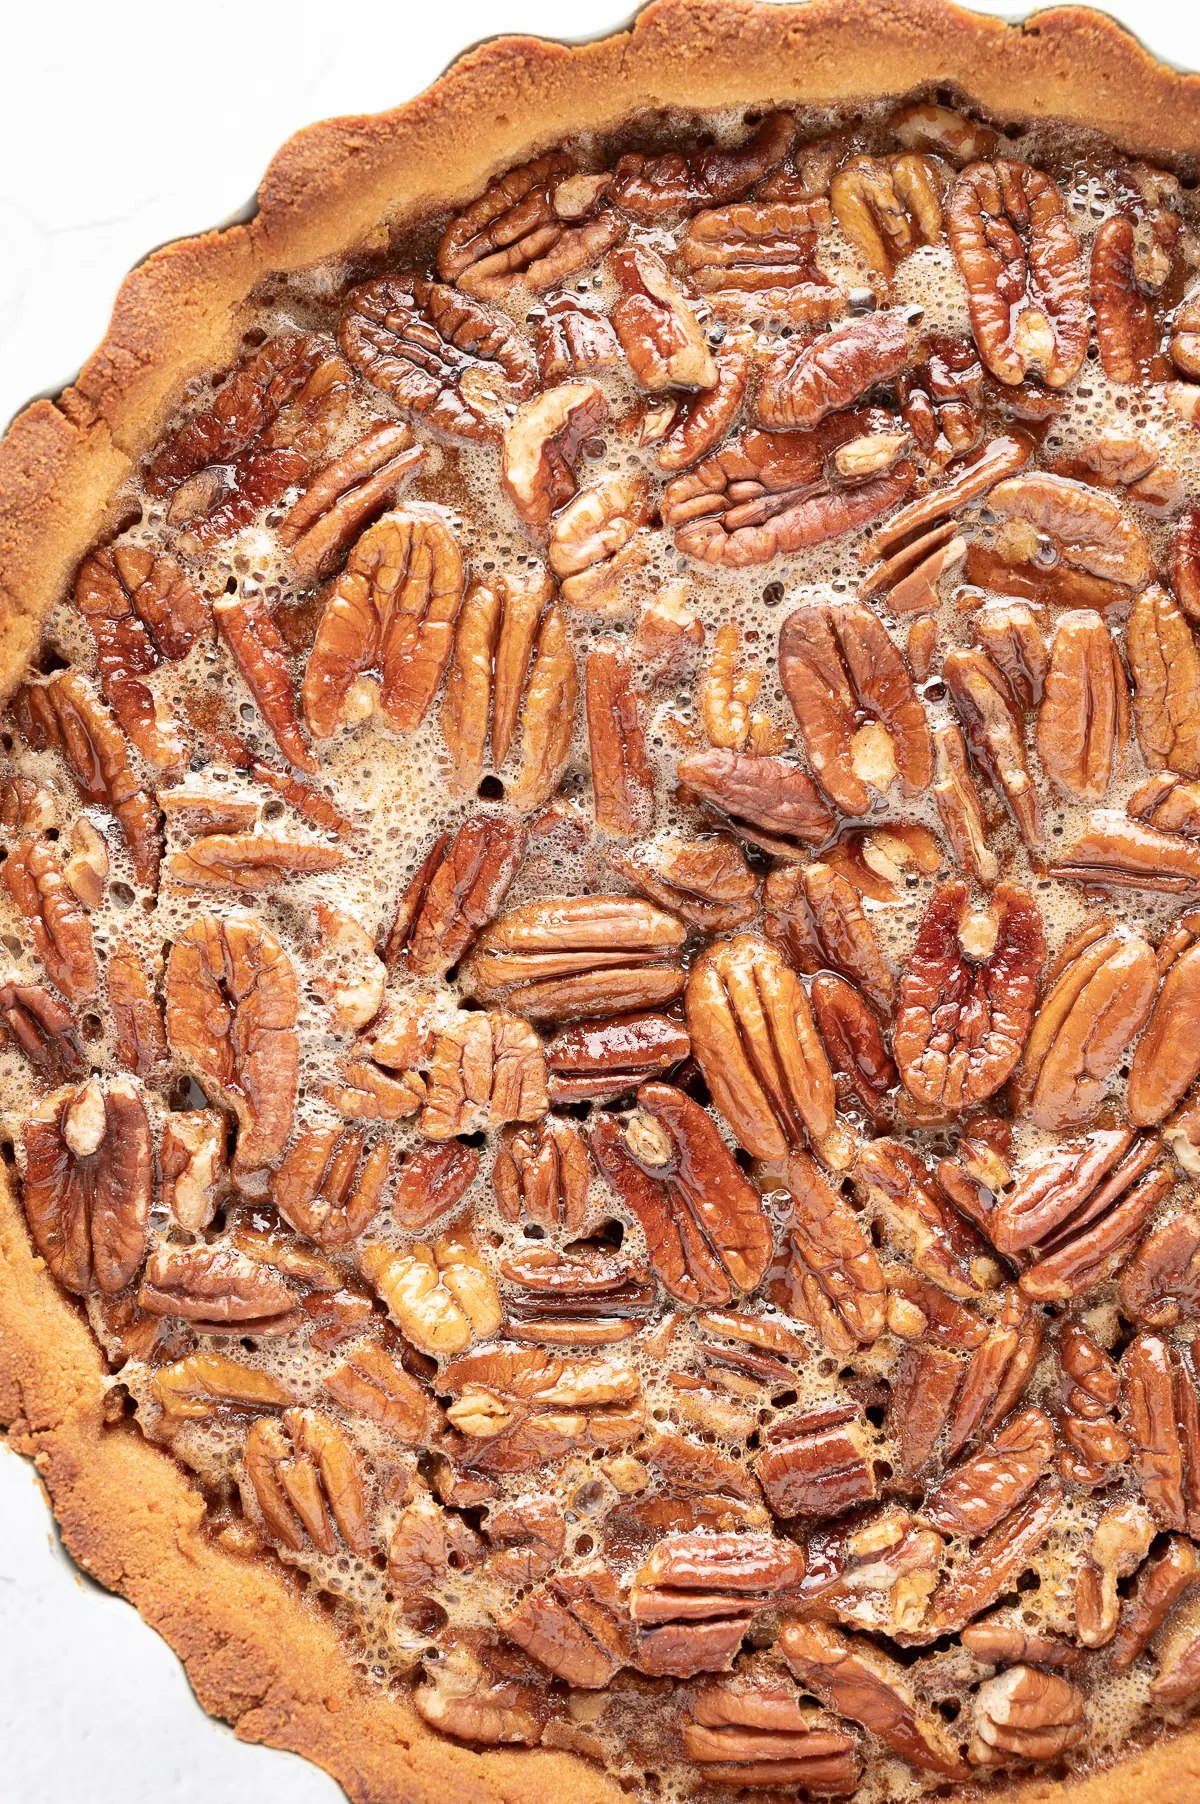 a close up image of the top of a pecan pie showing the sticky gooey texture of the filling and golden baked pecans in a perfectly baked crust. 